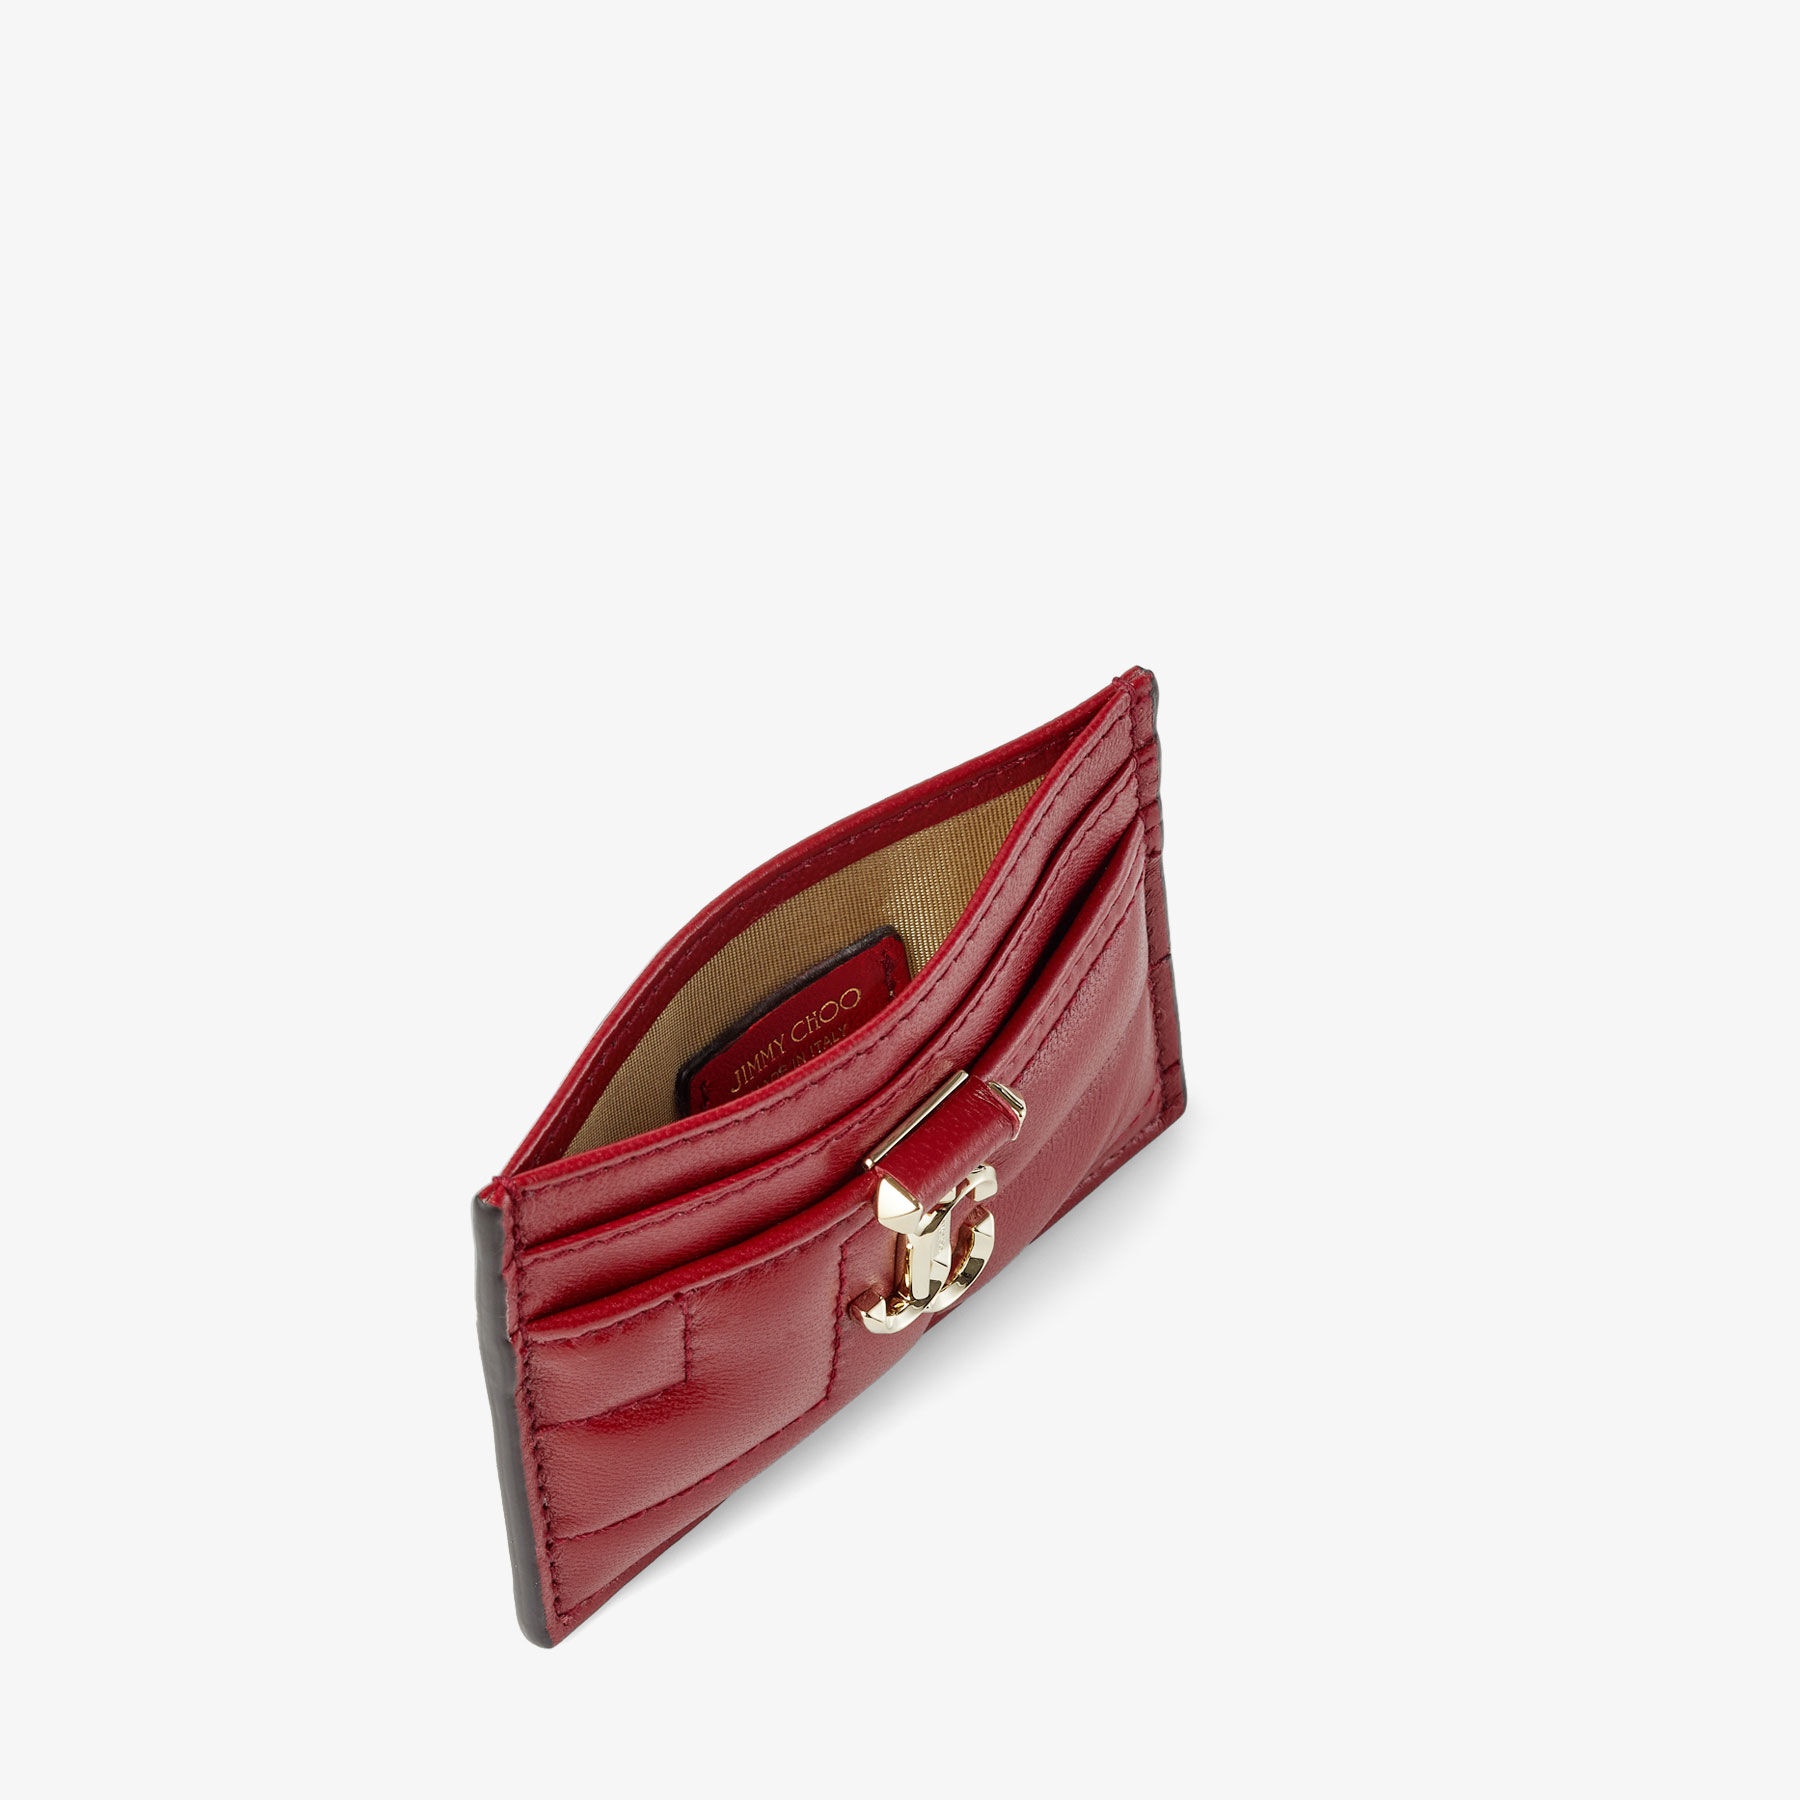 Umika
Cranberry Quilted Nappa Leather Card Holder with JC Emblem - 4